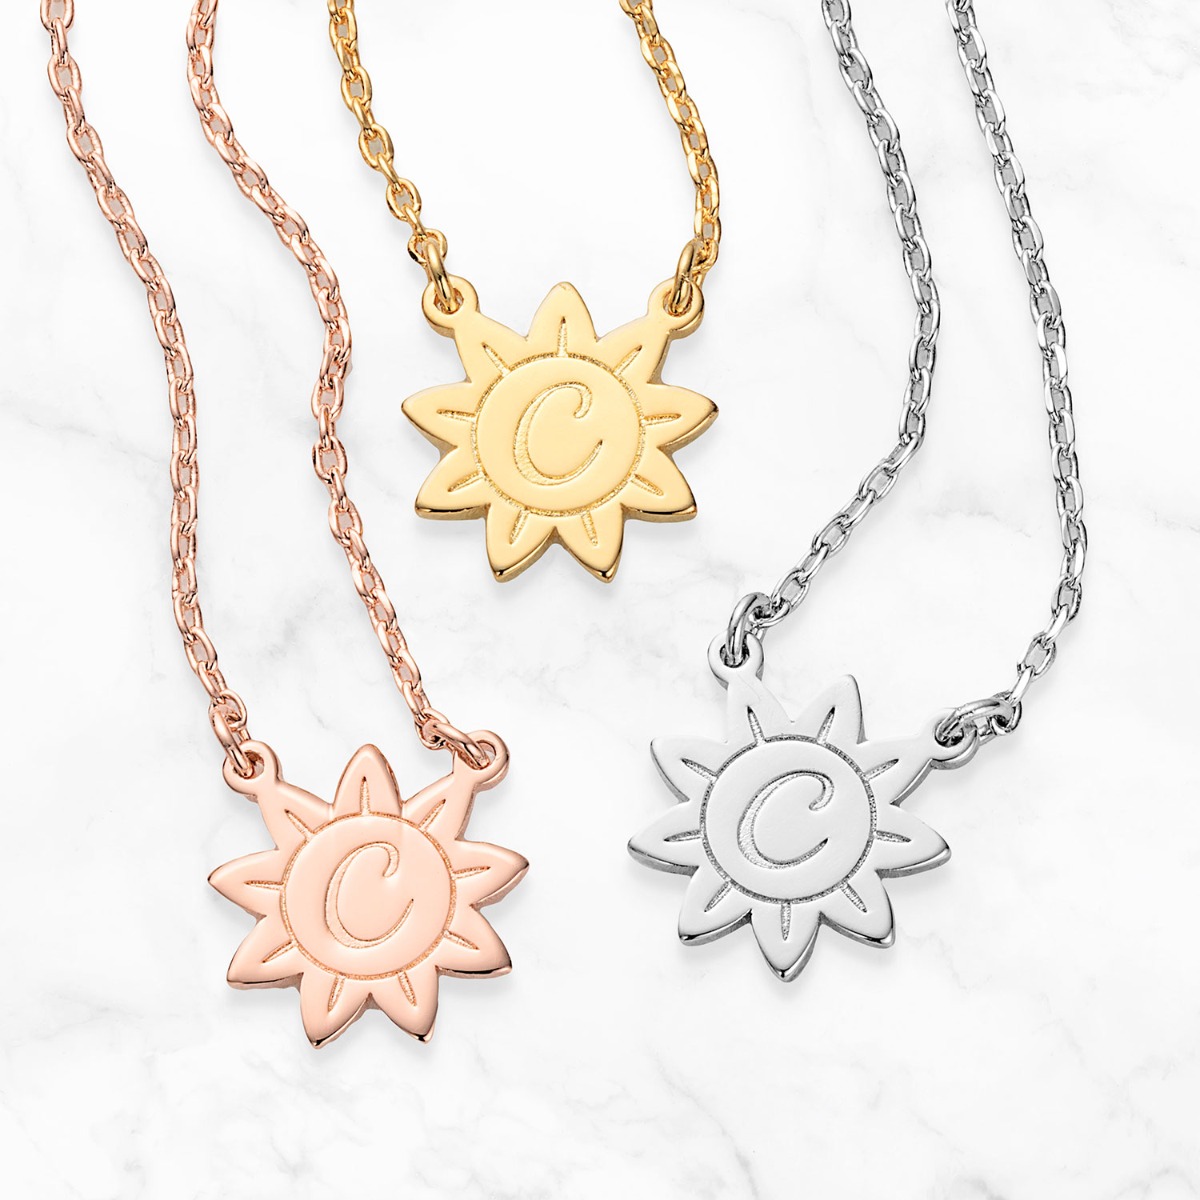 Personalized  Engraved Initial Sunflower Necklace